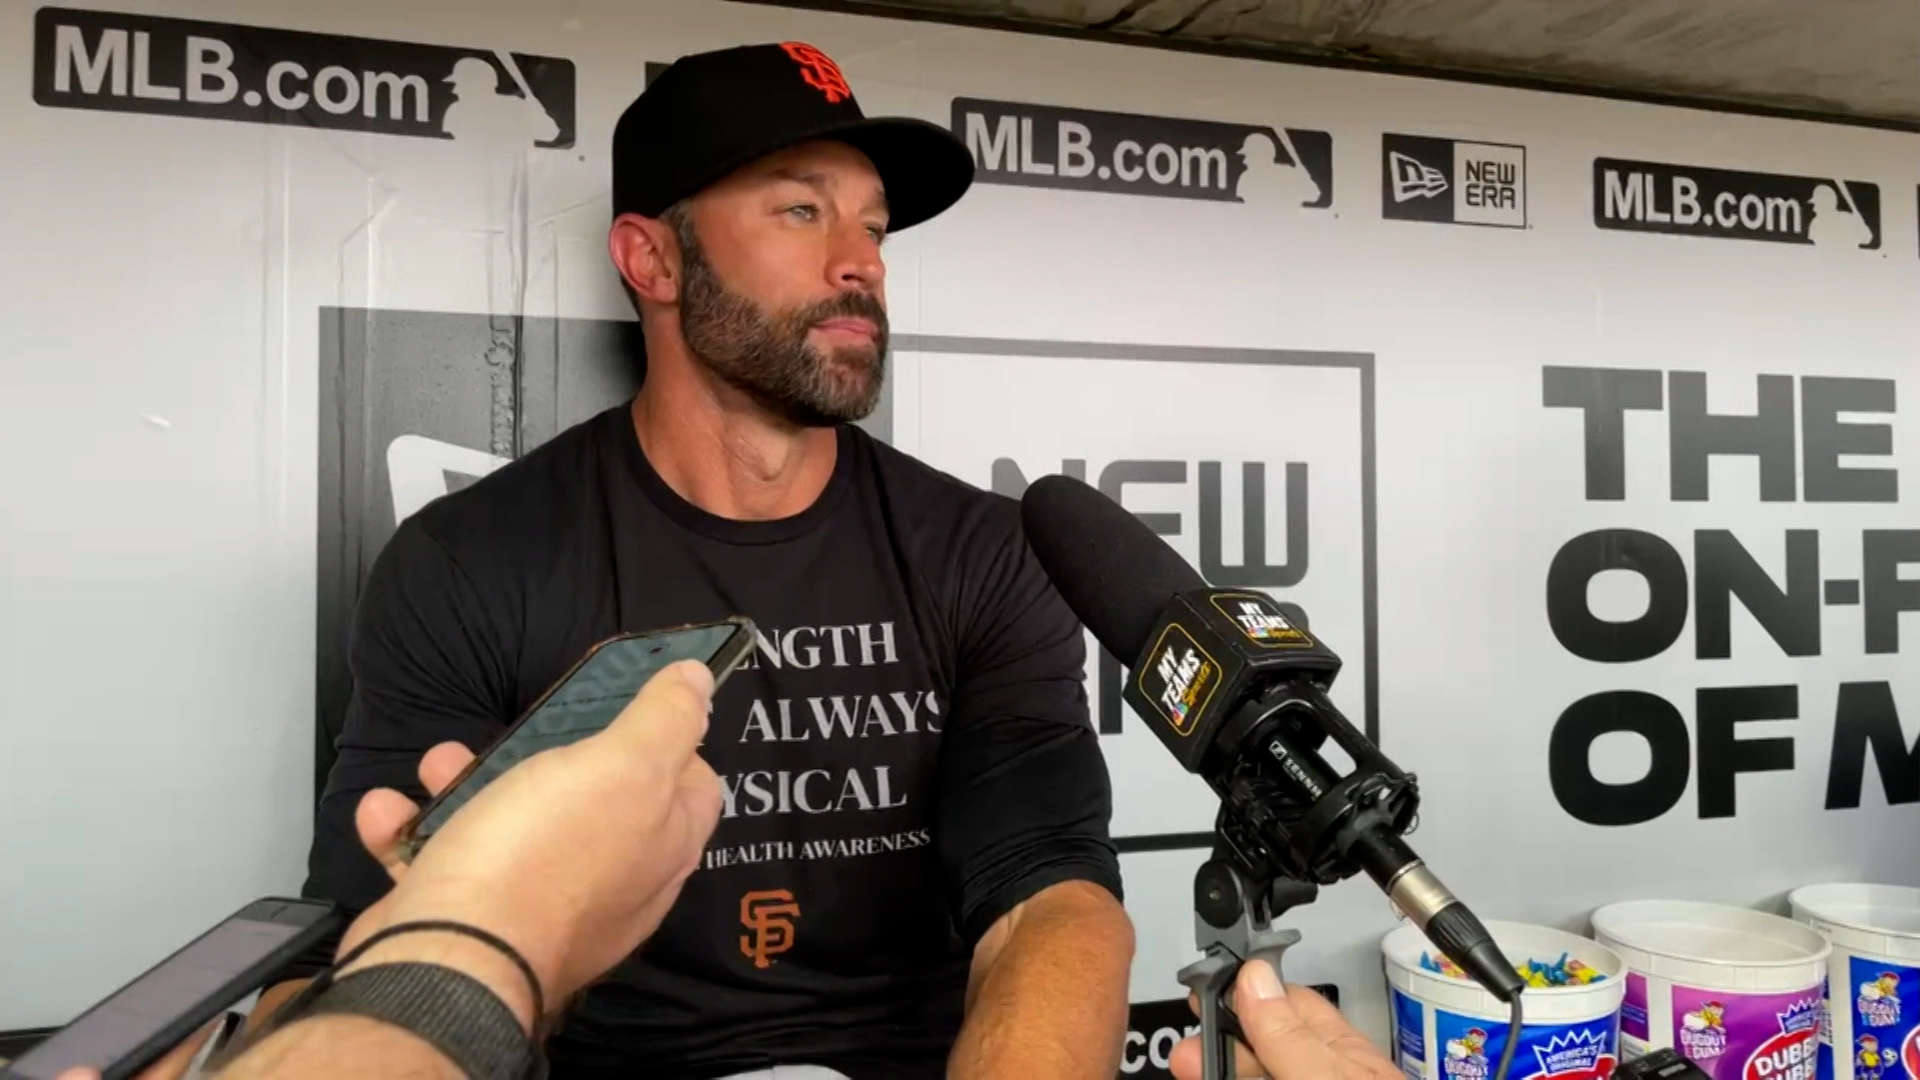 Gabe Kapler explains stance on not coming out for the national